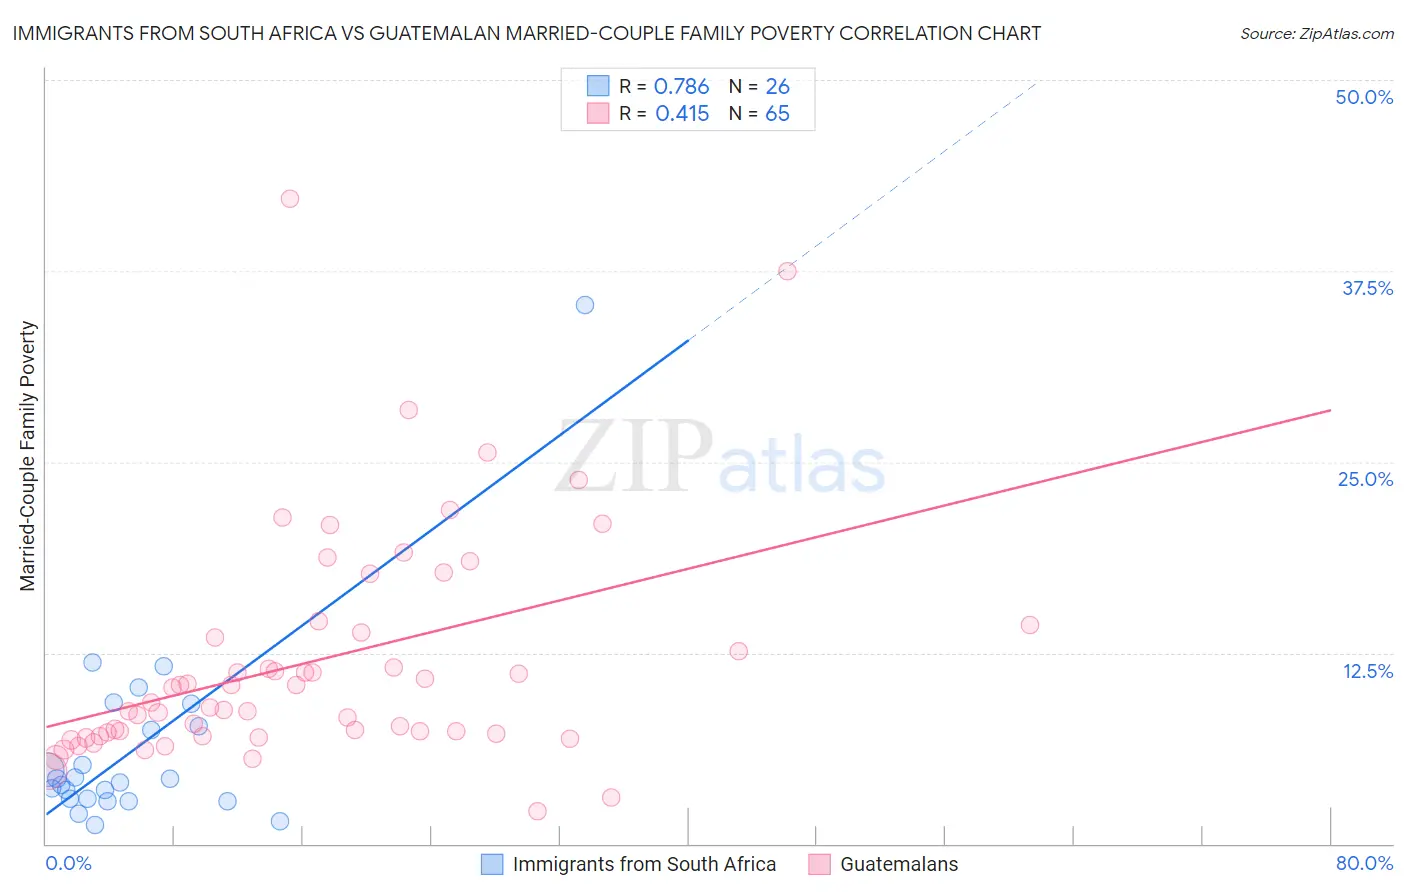 Immigrants from South Africa vs Guatemalan Married-Couple Family Poverty